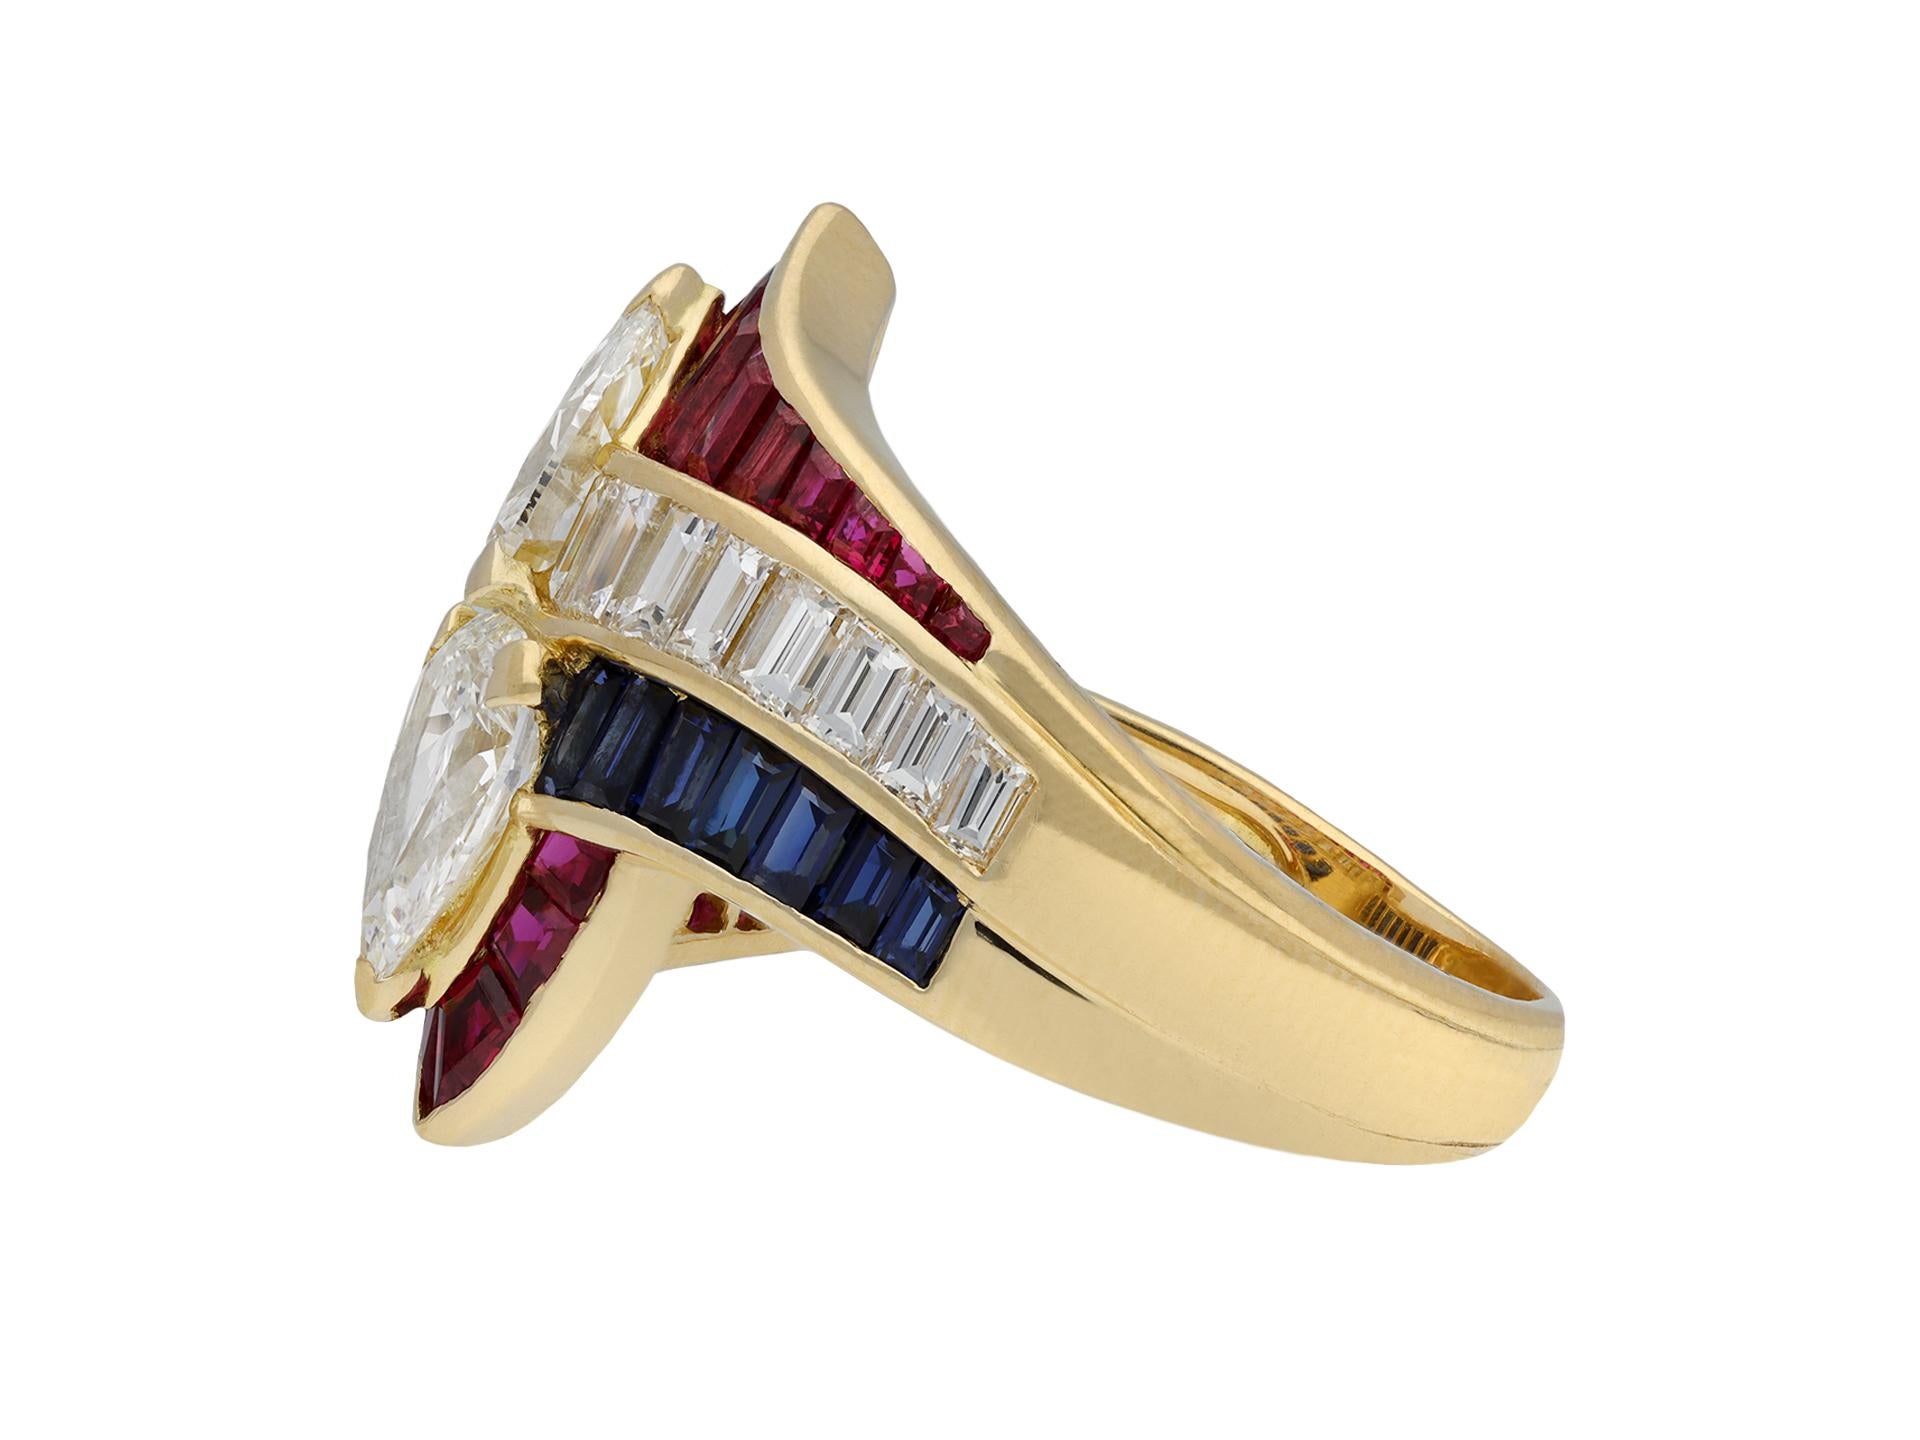 Mauboussin diamond, ruby and sapphire crossover ring. Set with two drop shape brilliant cut diamonds in open back claw settings with a combined approximate weight of 2.10 carats, flanked by sixteen rectangular baguette cut diamonds in open back